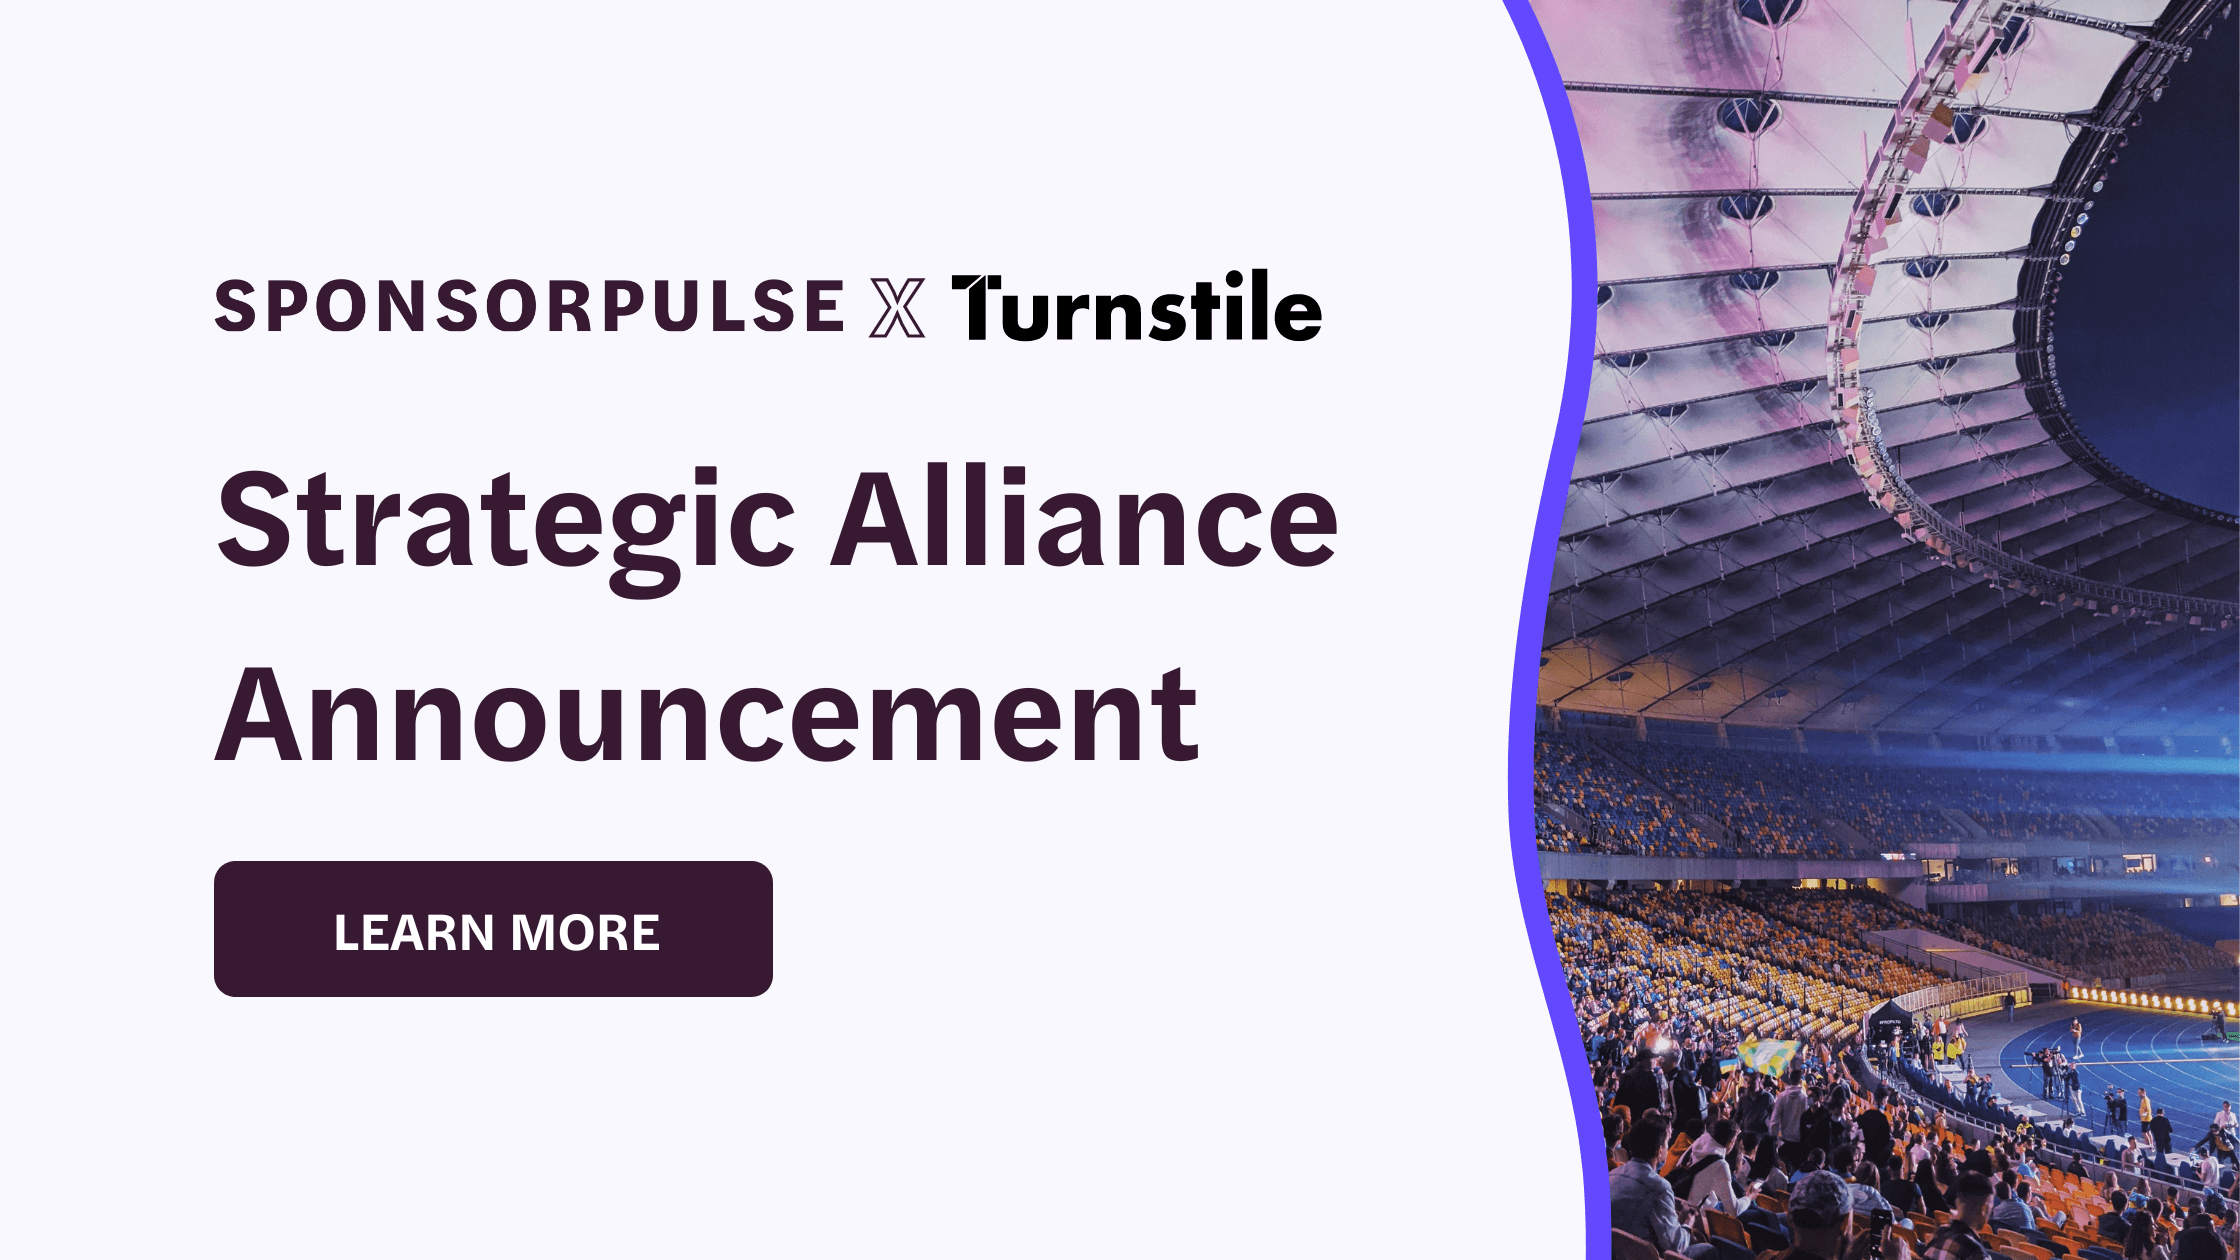 We're teaming up with Global Sponsorship Intelligence leader Turnstile to deliver synergistic sponsorship solutions. Learn more about the partnership!